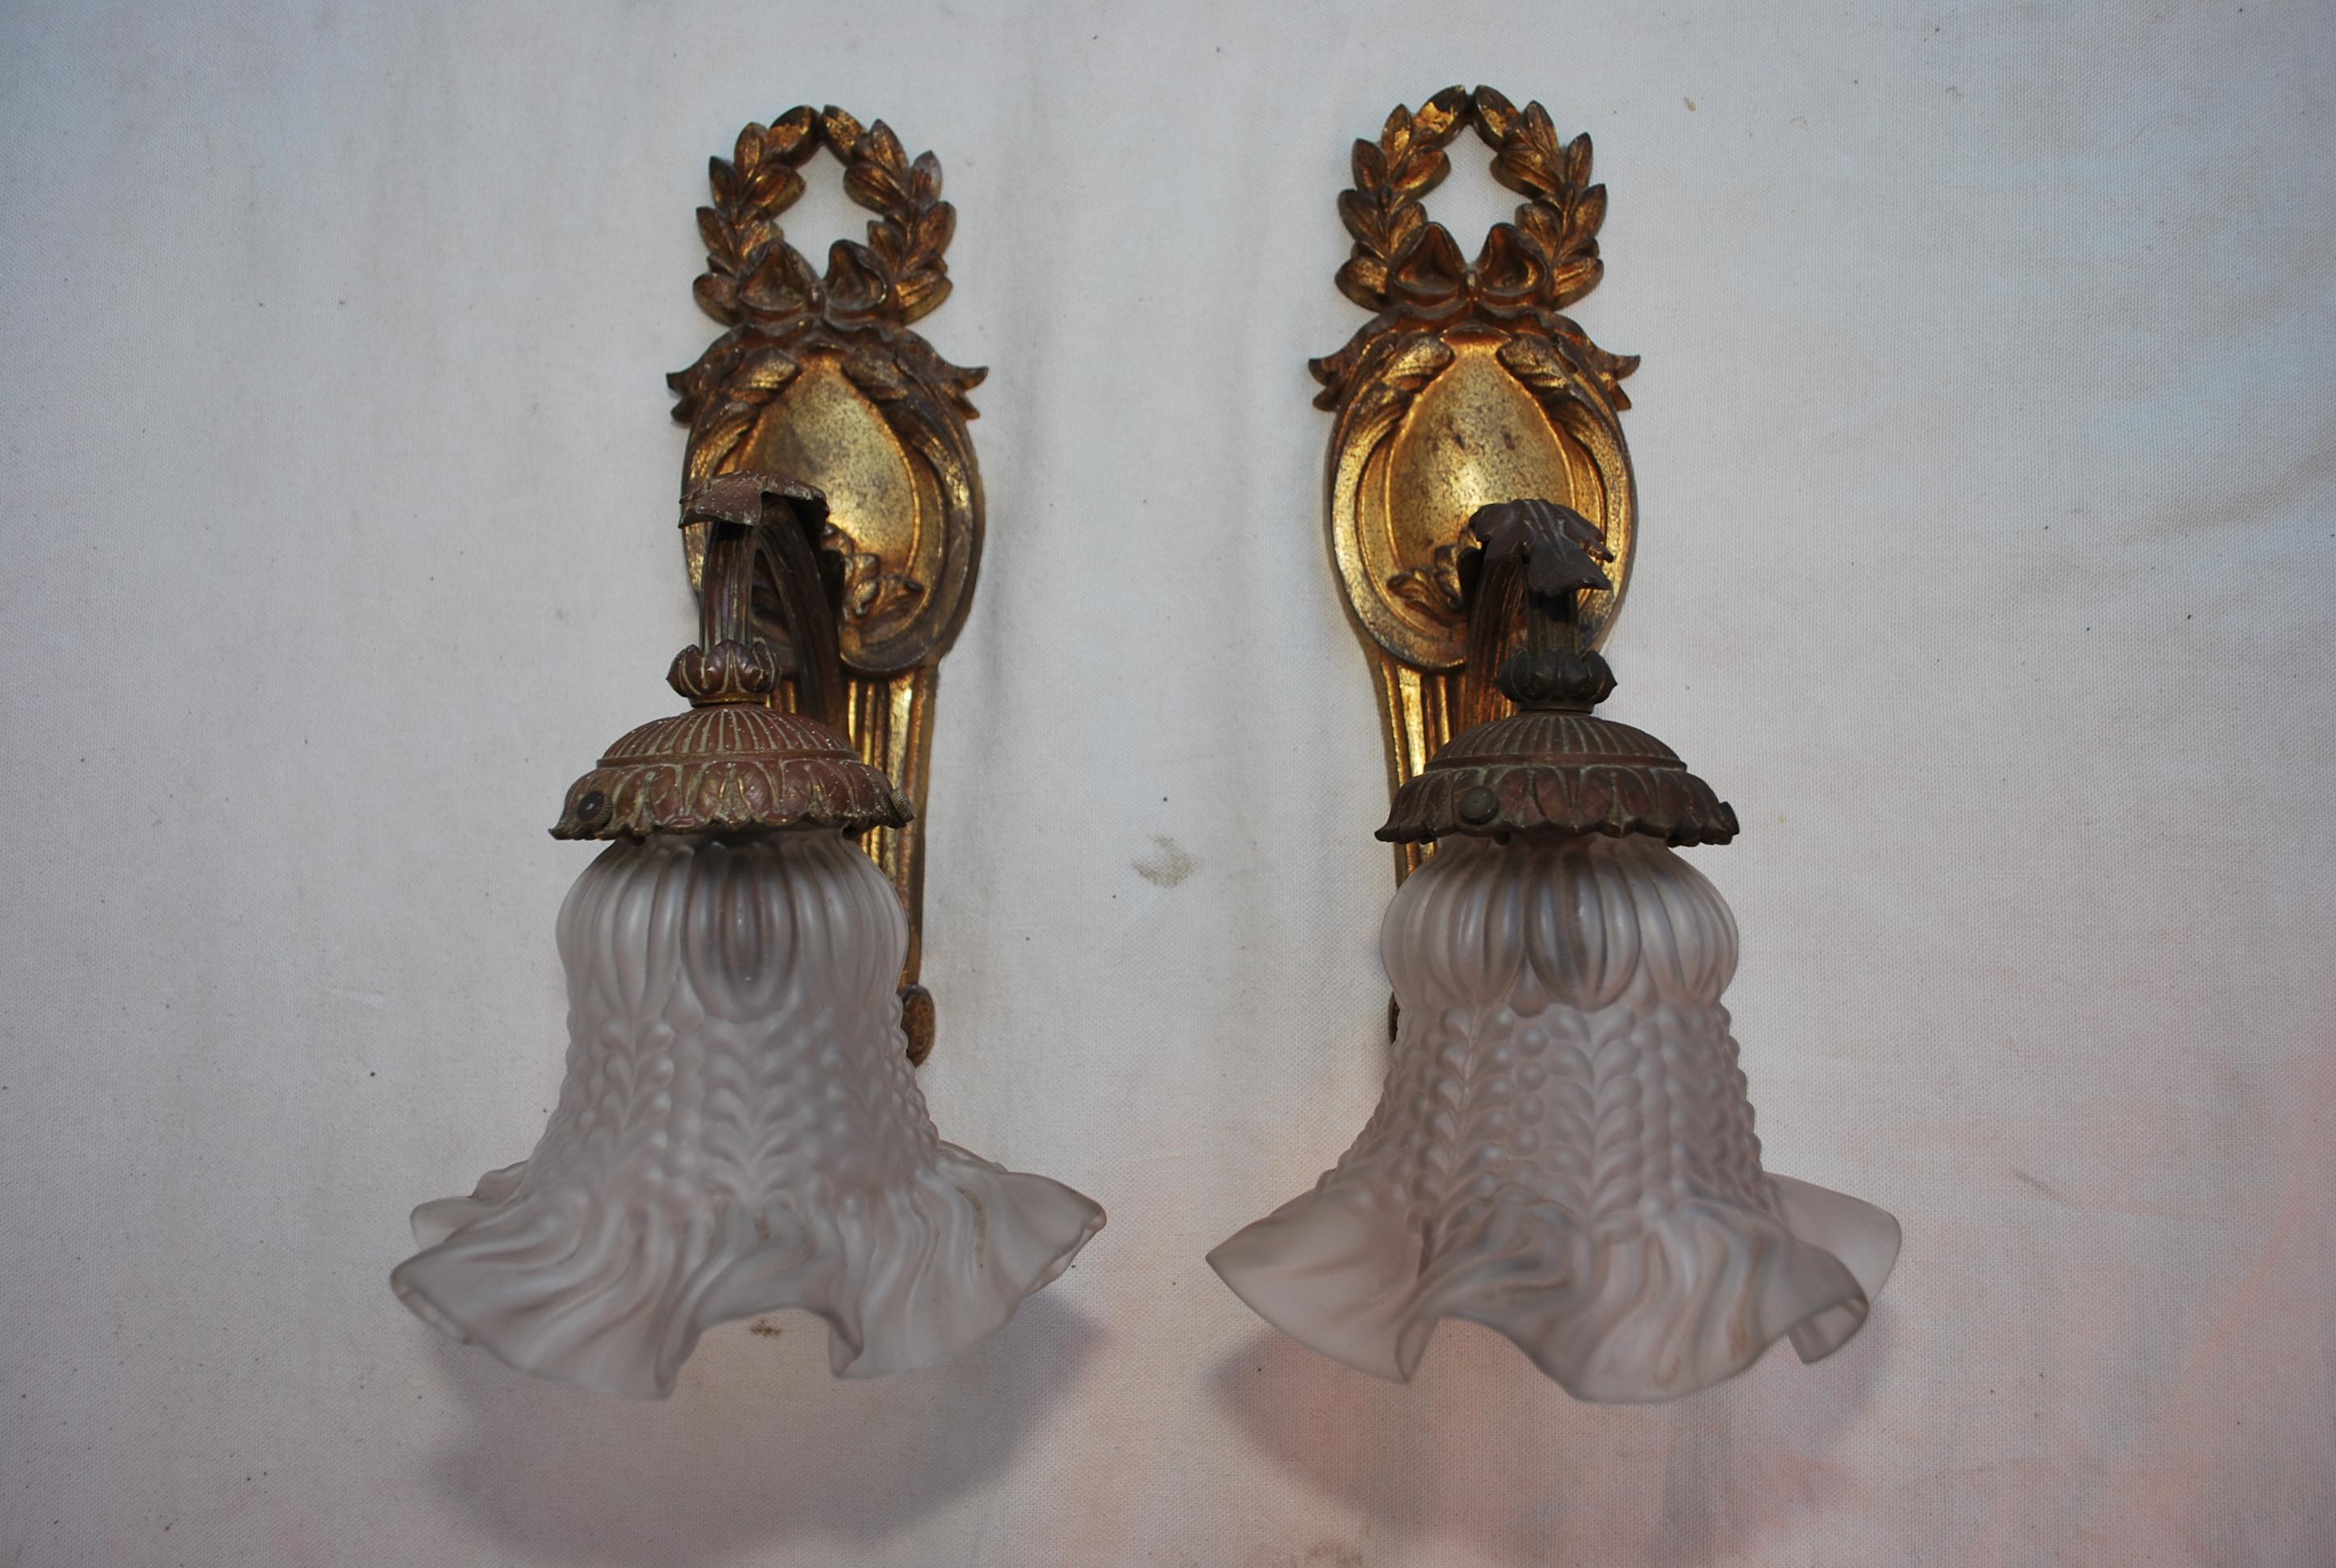 A beautiful pair of french turn of the century bronze sconces, the patina is so much nicer in person, since we are rewired the sconces, we could added a plate in the back if necessary.